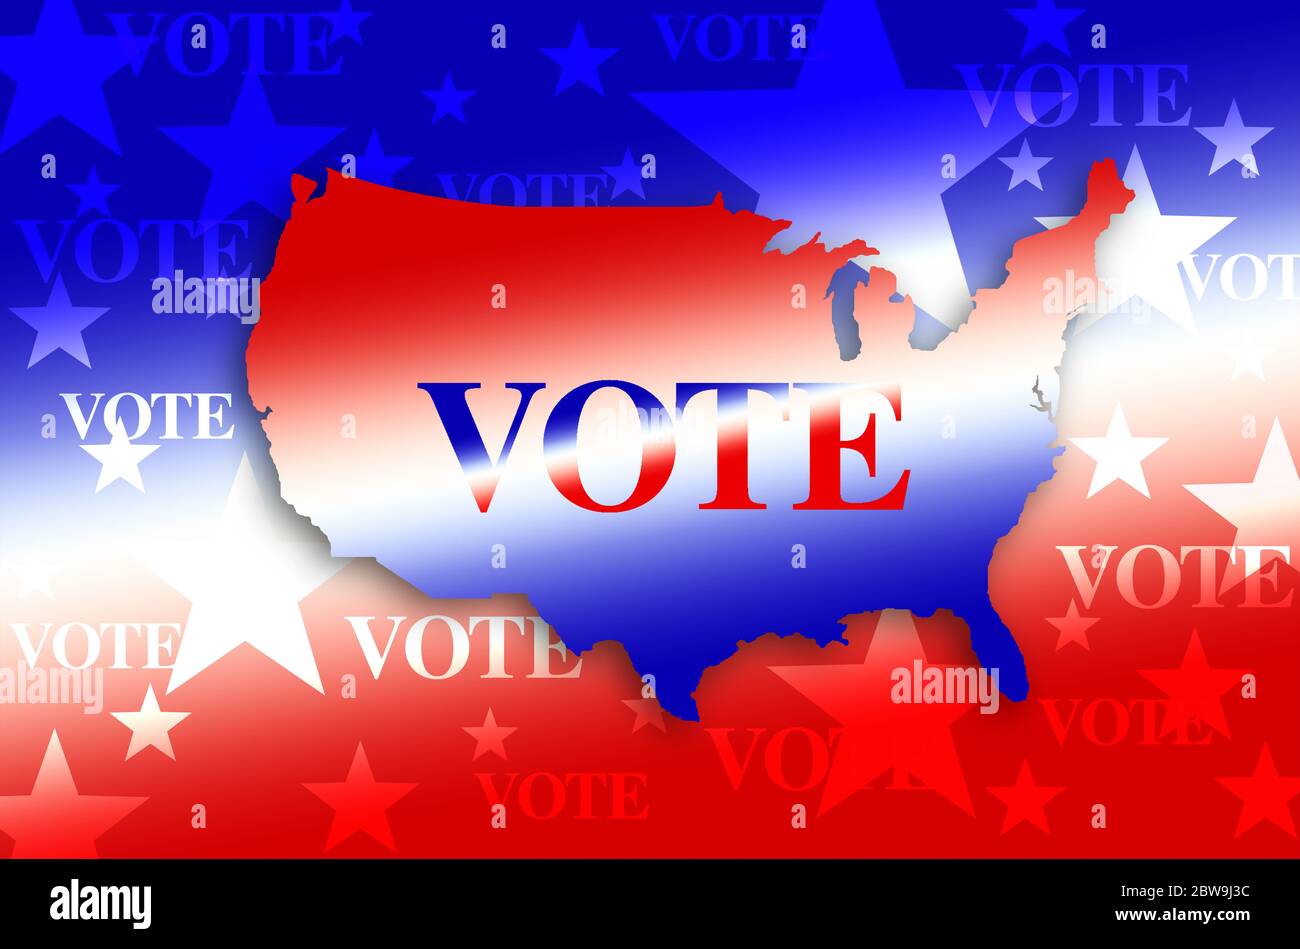 Digitally generated image of shape of USA map and vote signs Stock Photo